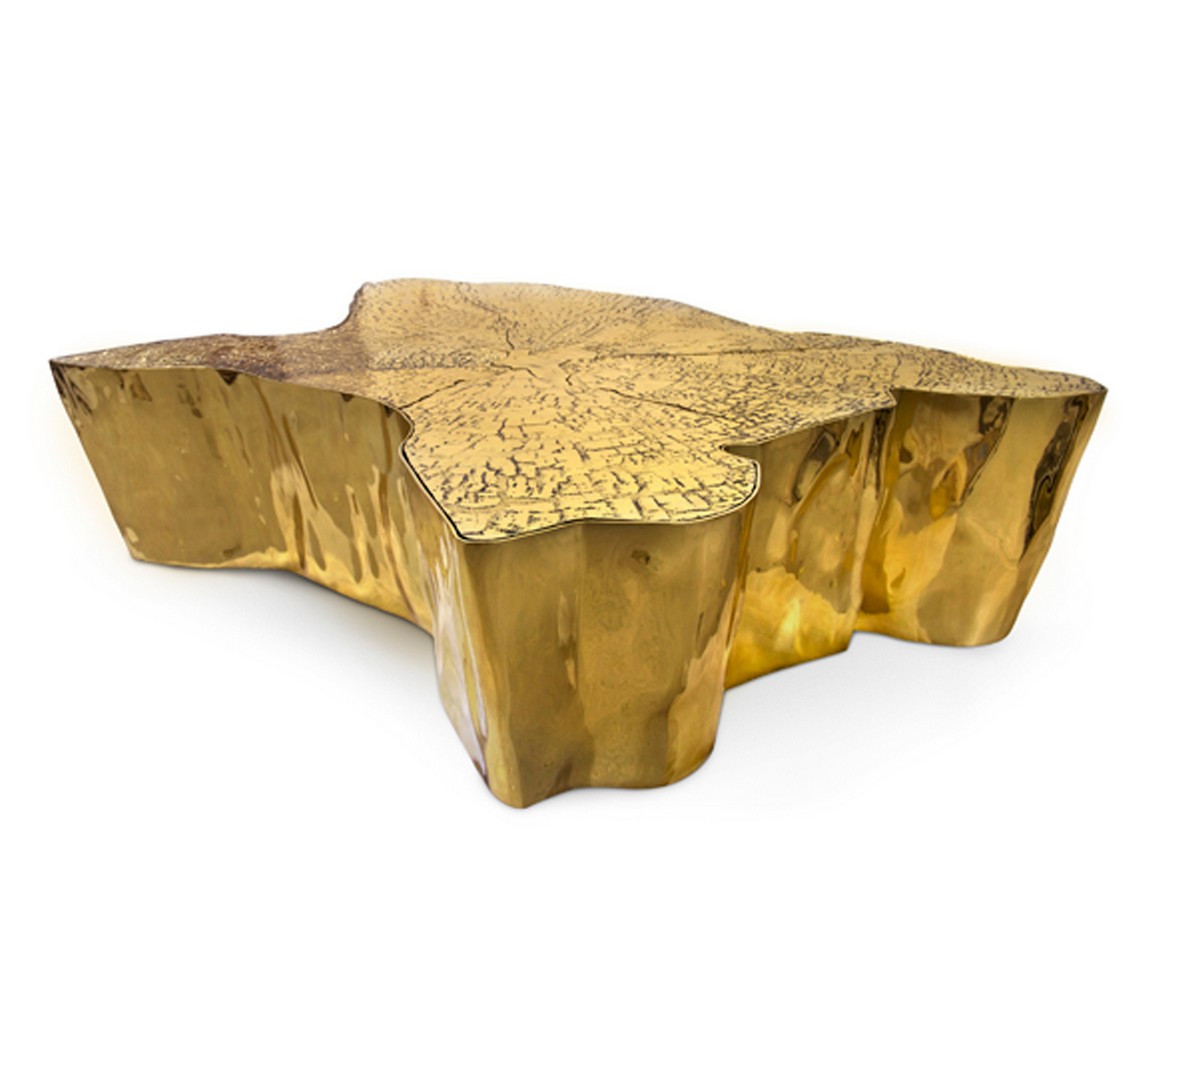 Golden Center Tables That Will Make Your Living Room Shine